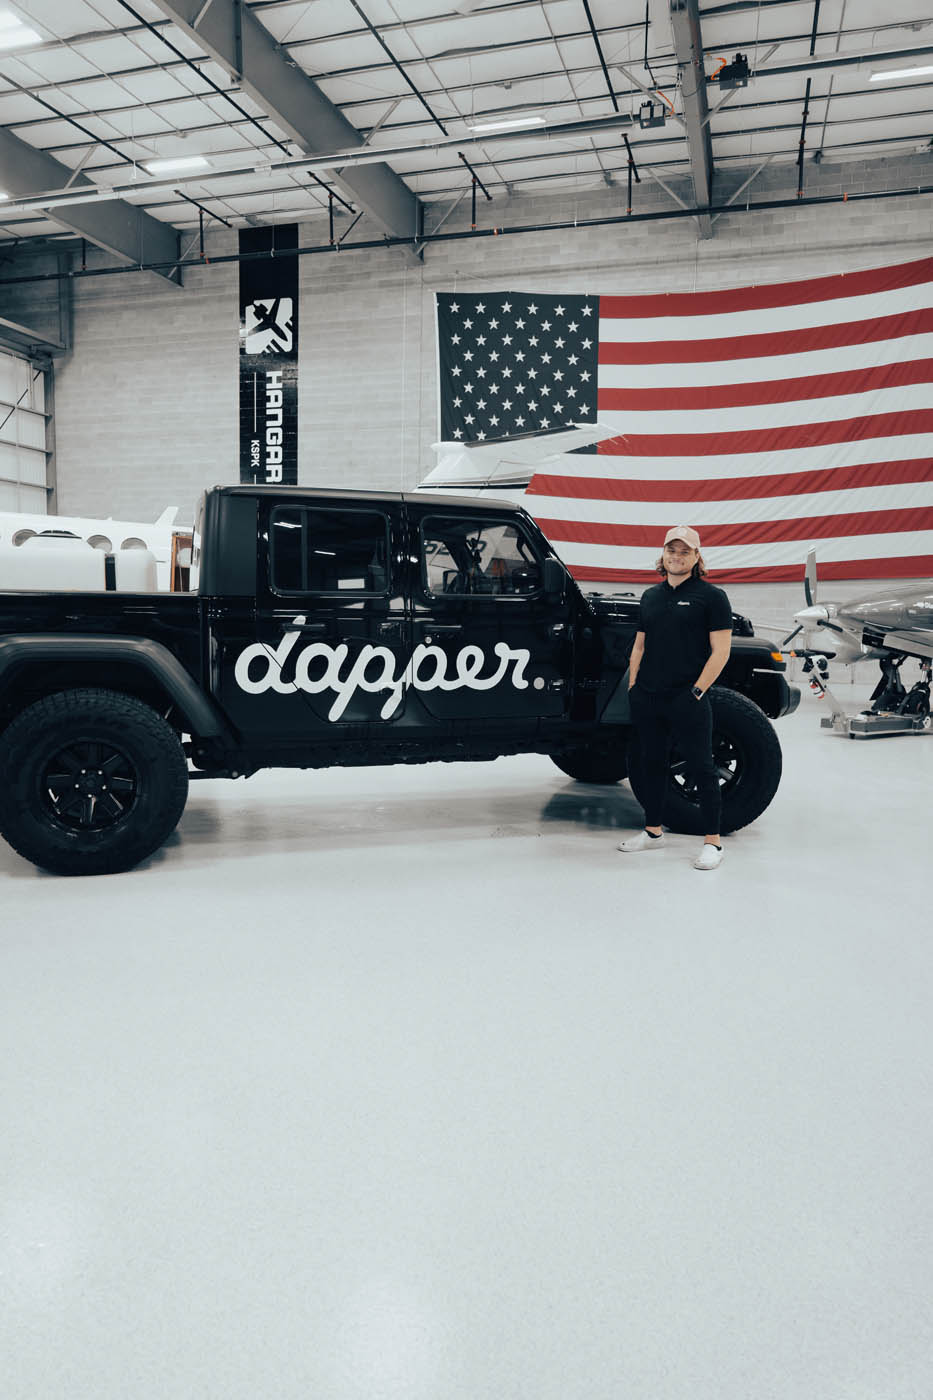 Dapper Pros owner, Henry Briggs, standing in front of their Dapper jeep truck.